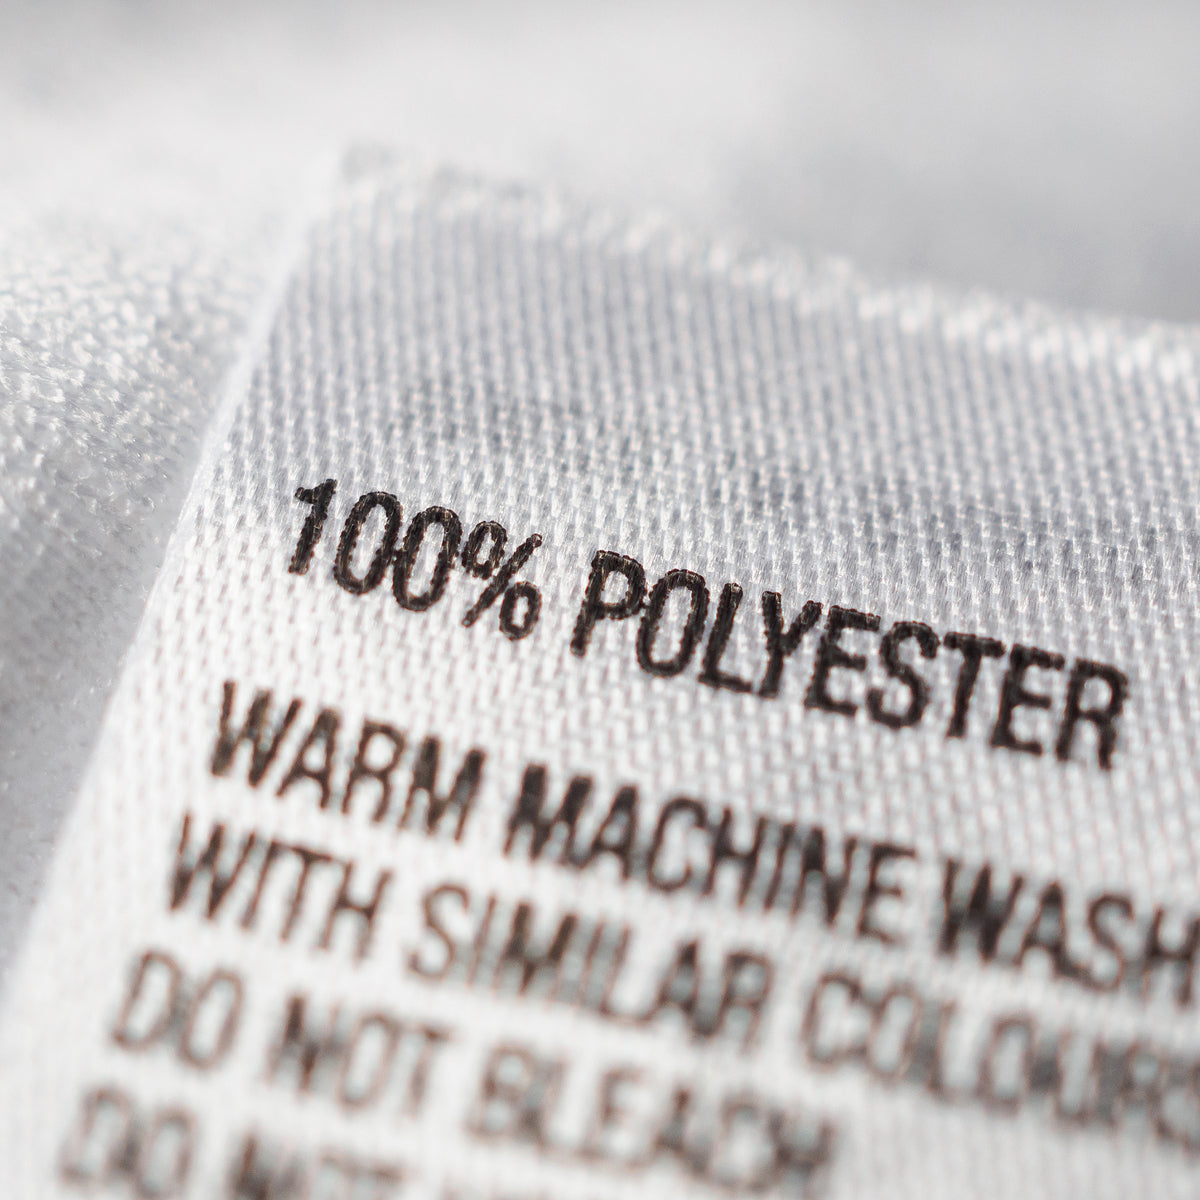 Polyester is actually pretty cool